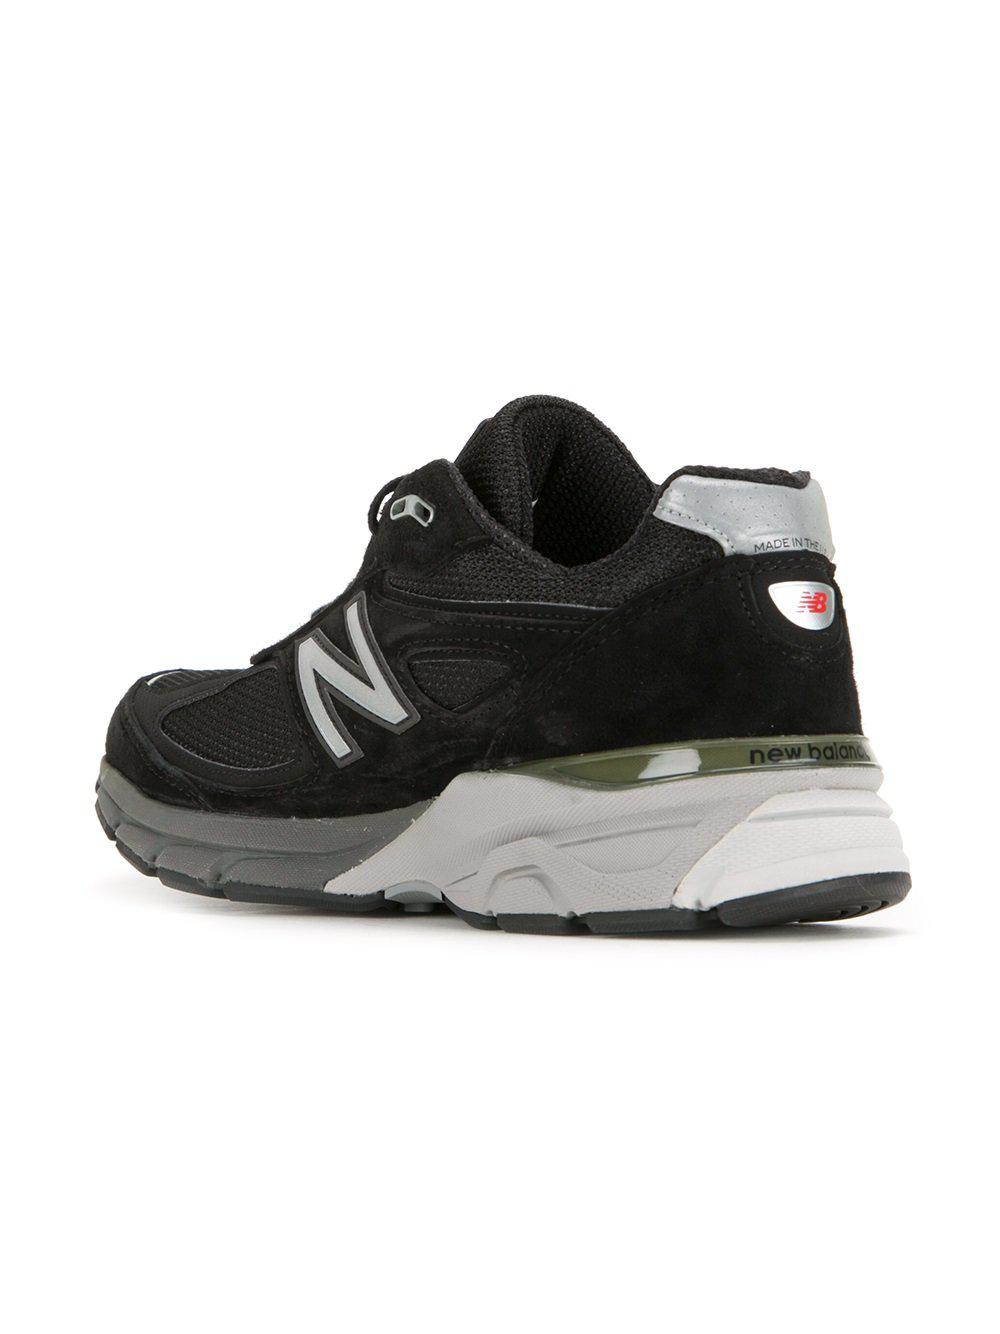 New Balance Suede 990v4 Sneakers in Black for Men - Lyst